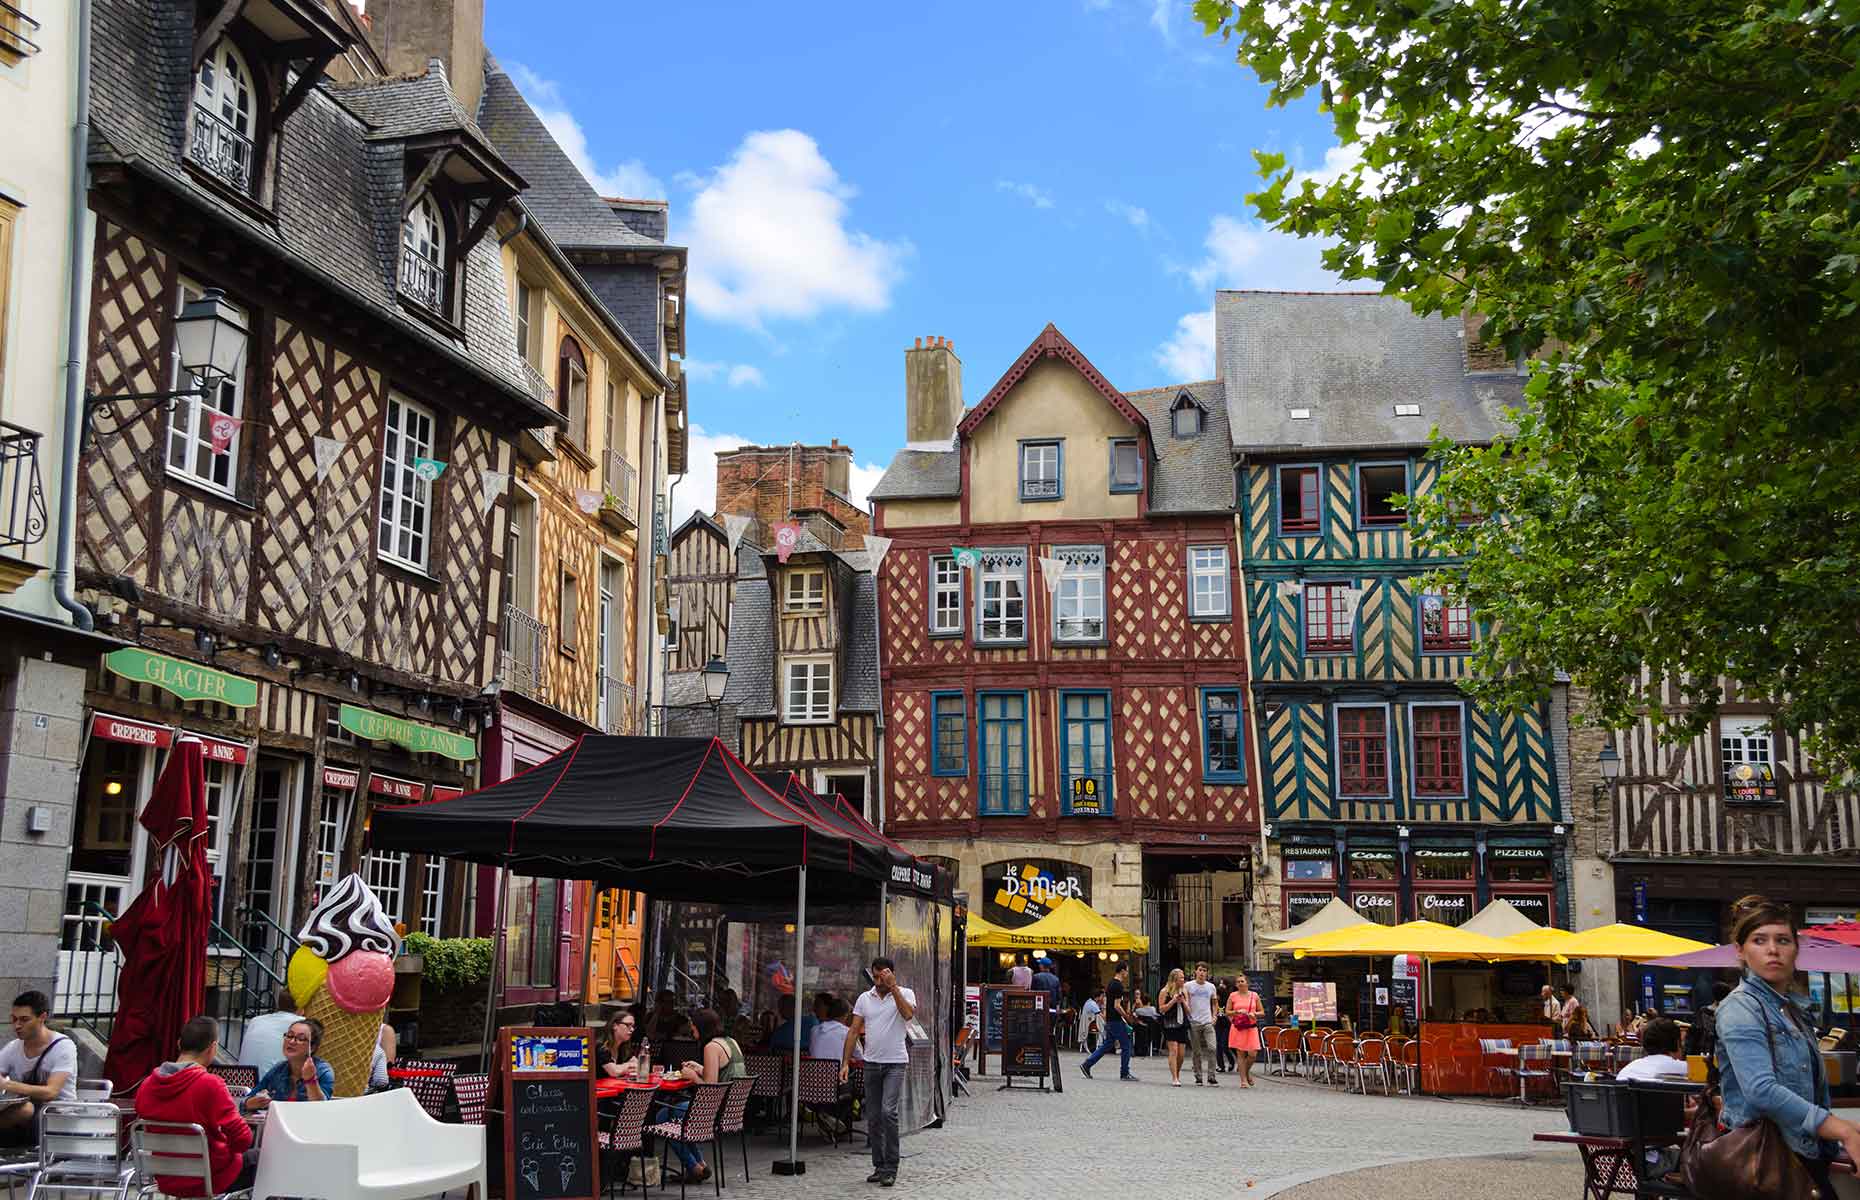 Rennes, Brittany, France in the summer with medieval buildings (Image: lenisecalleja.photography/Shutterstock)